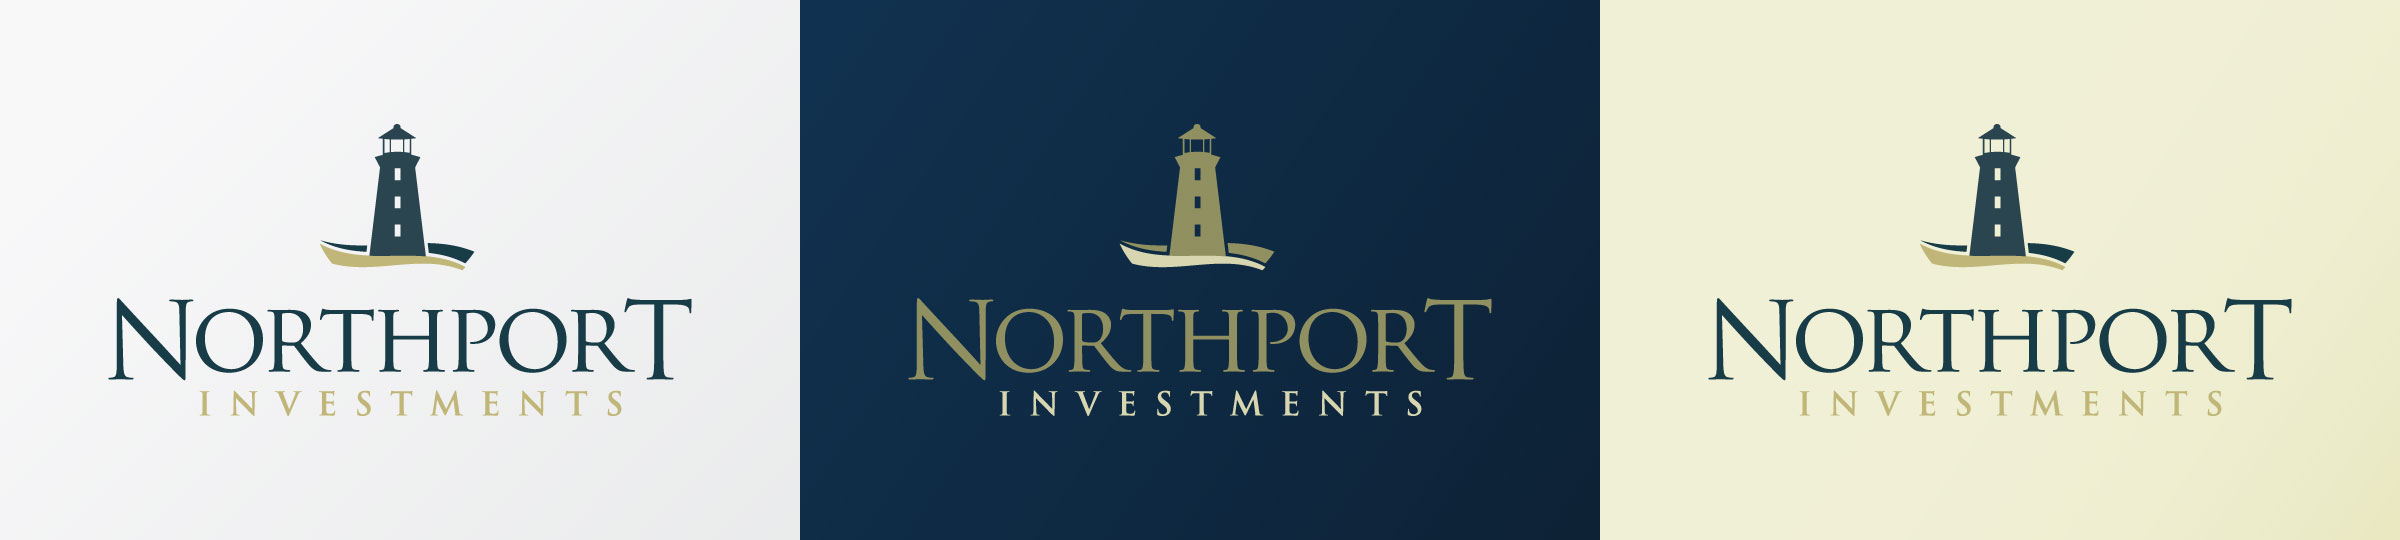 Northport Investments Logo Color Variants